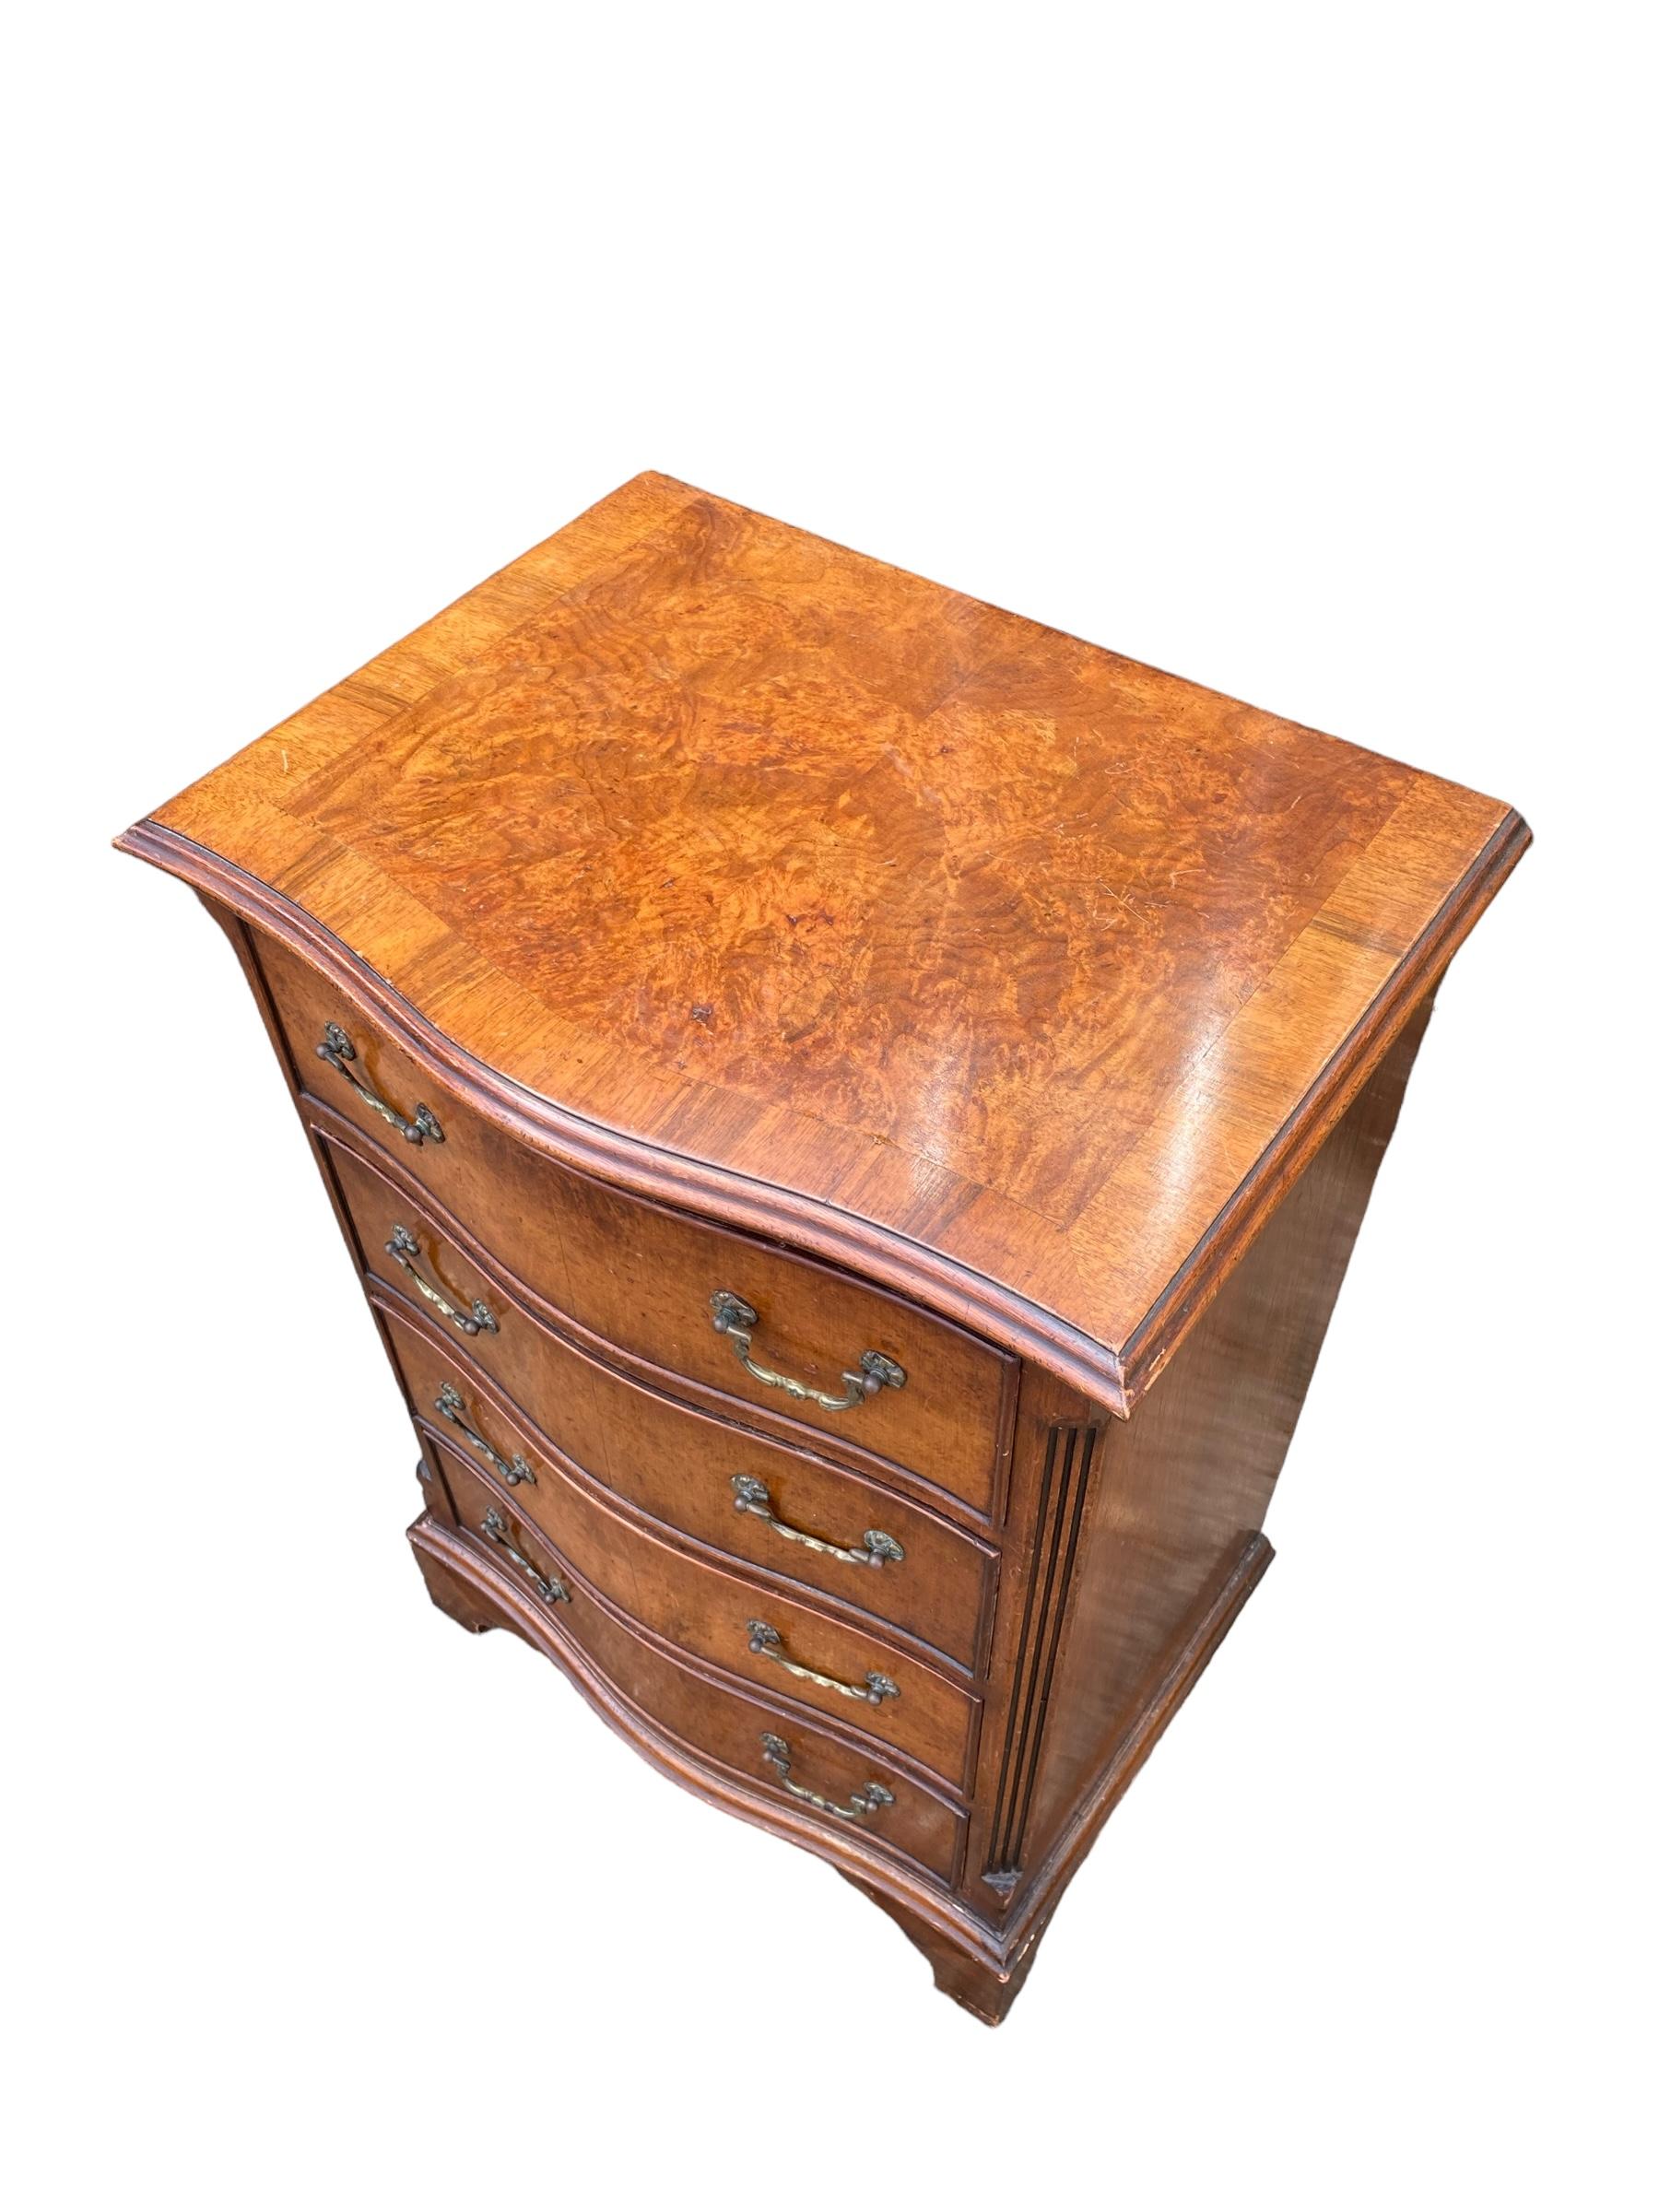 20th Century Small serpentine burr walnut veneered chest of drawers. For Sale